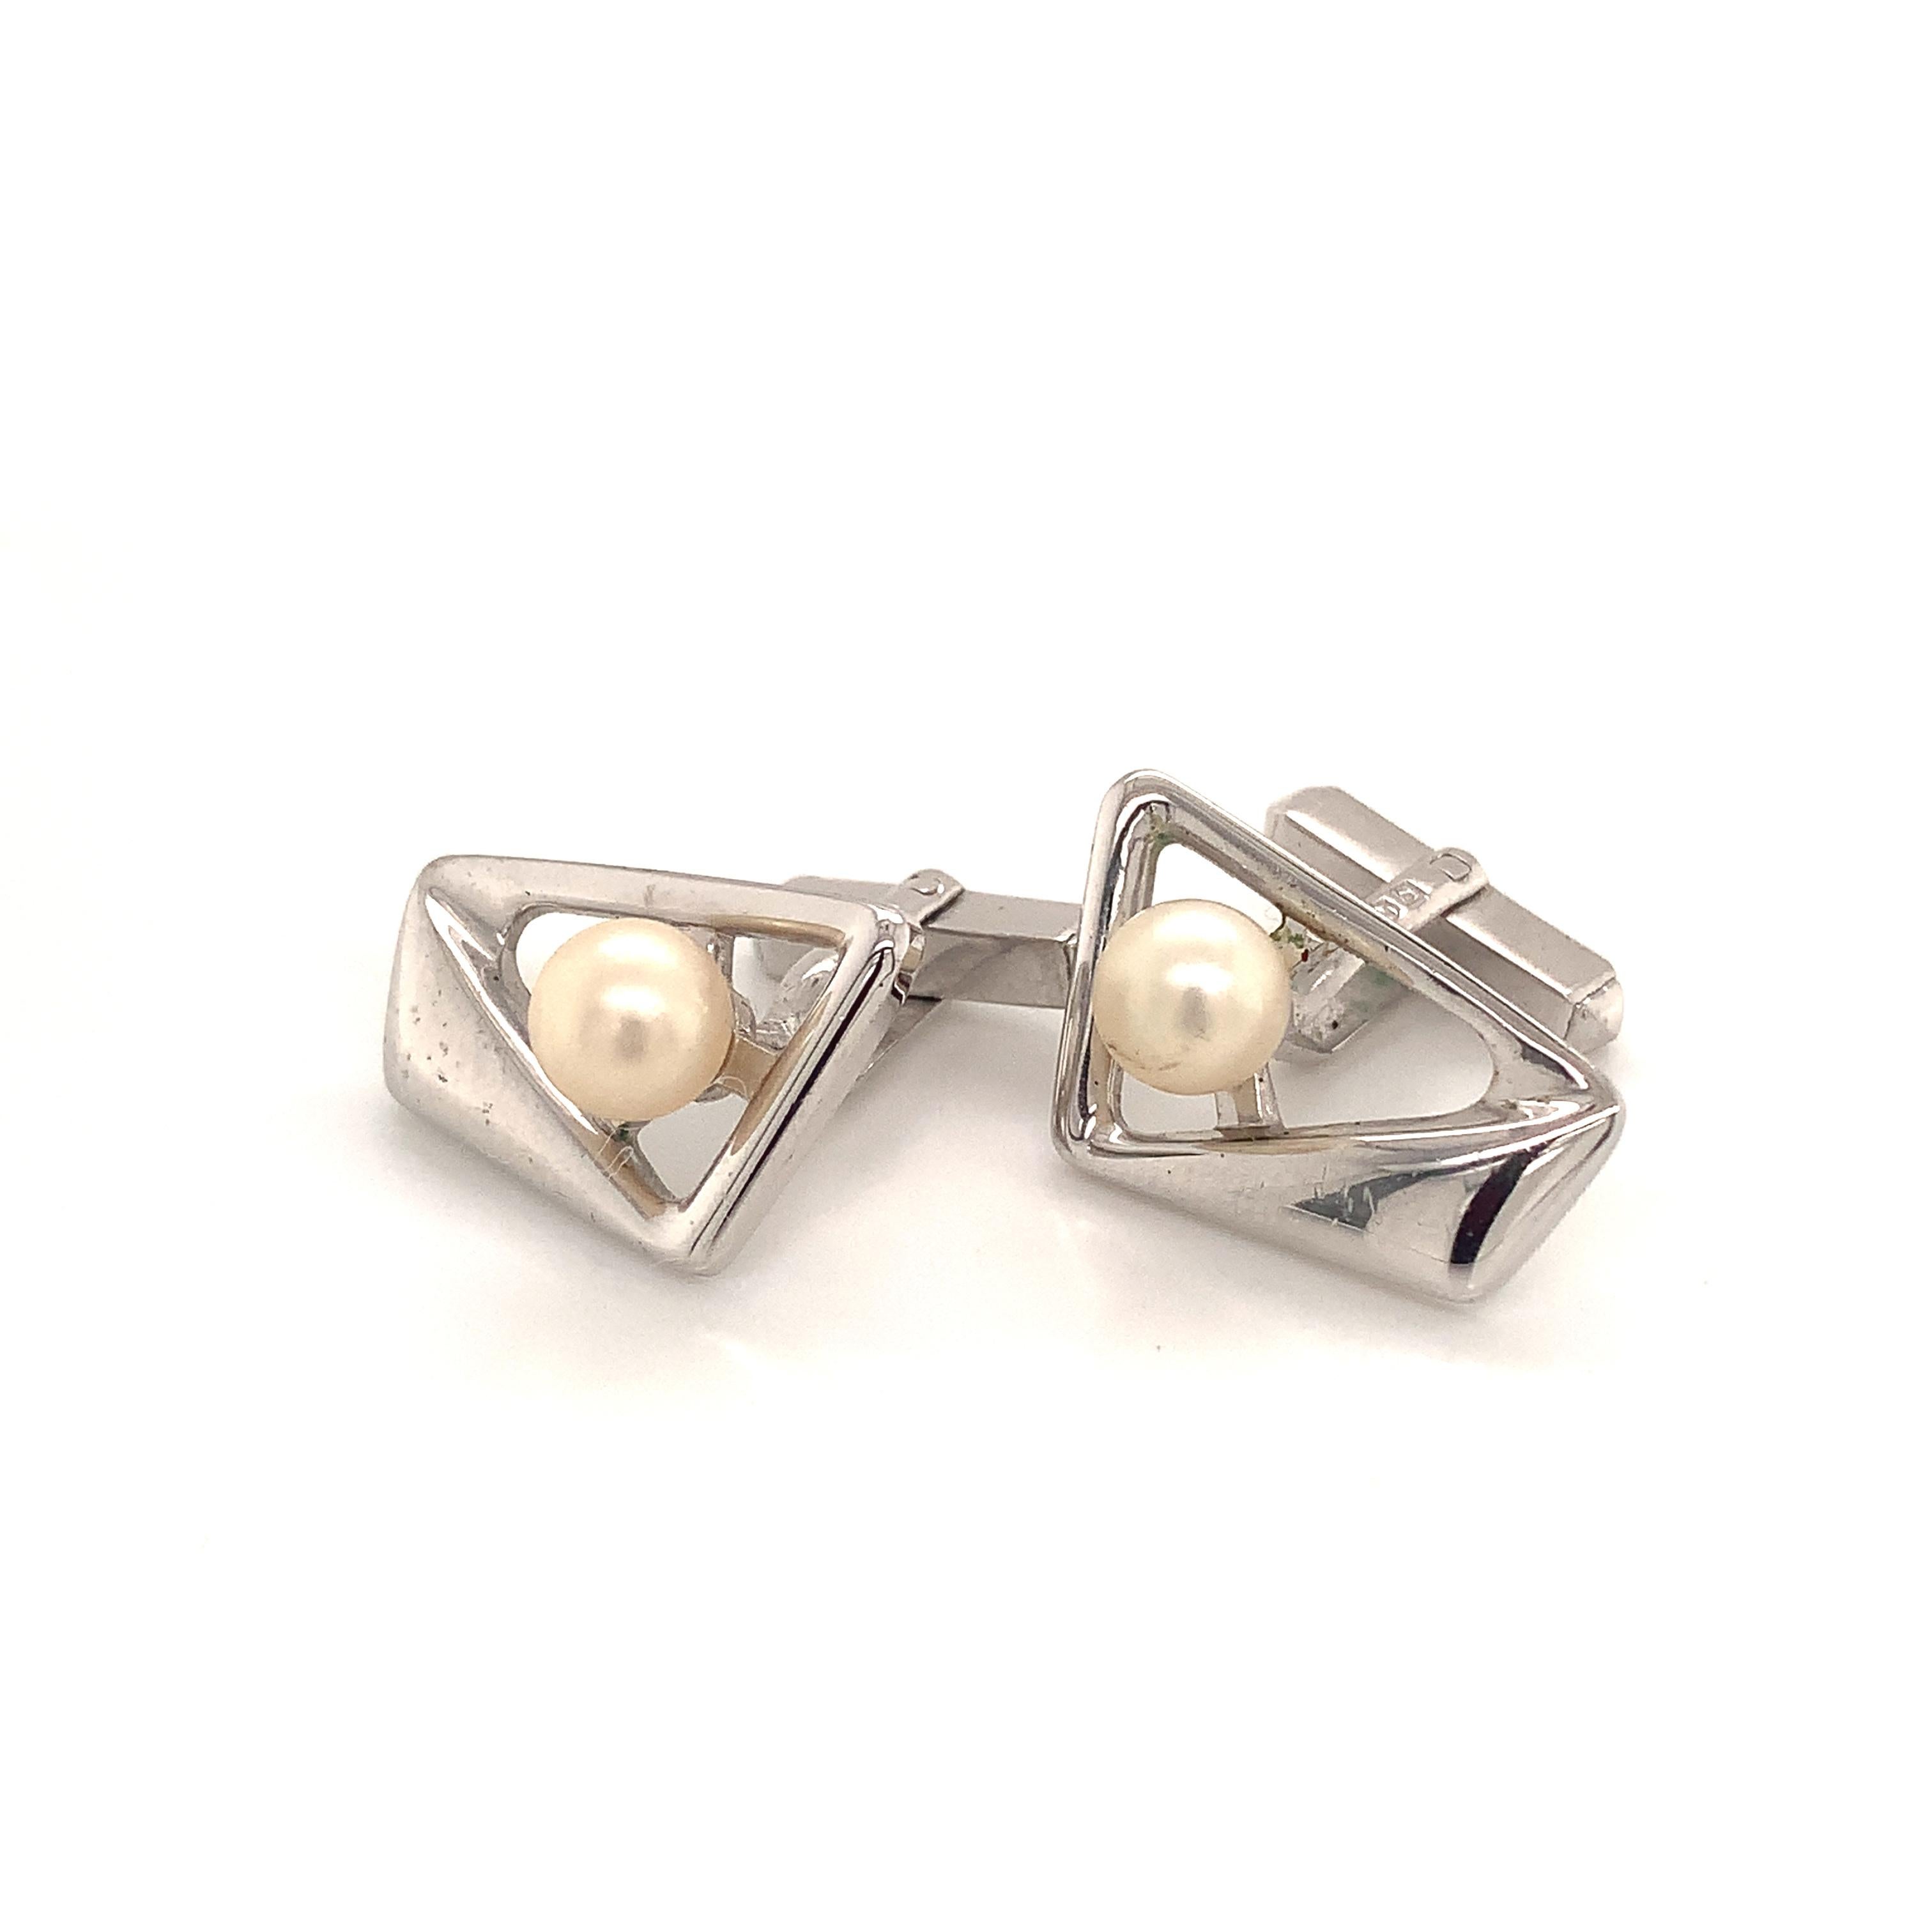 Mikimoto Estate Akoya Pearl Cufflinks Sterling Silver 7 mm 10.35 Grams M216

These elegant Authentic Mikimoto Estate Akoya pearl cufflinks are made of sterling silver and have 2 Akoya Cultured Pearls.

TRUSTED SELLER SINCE 2002

PLEASE SEE OUR